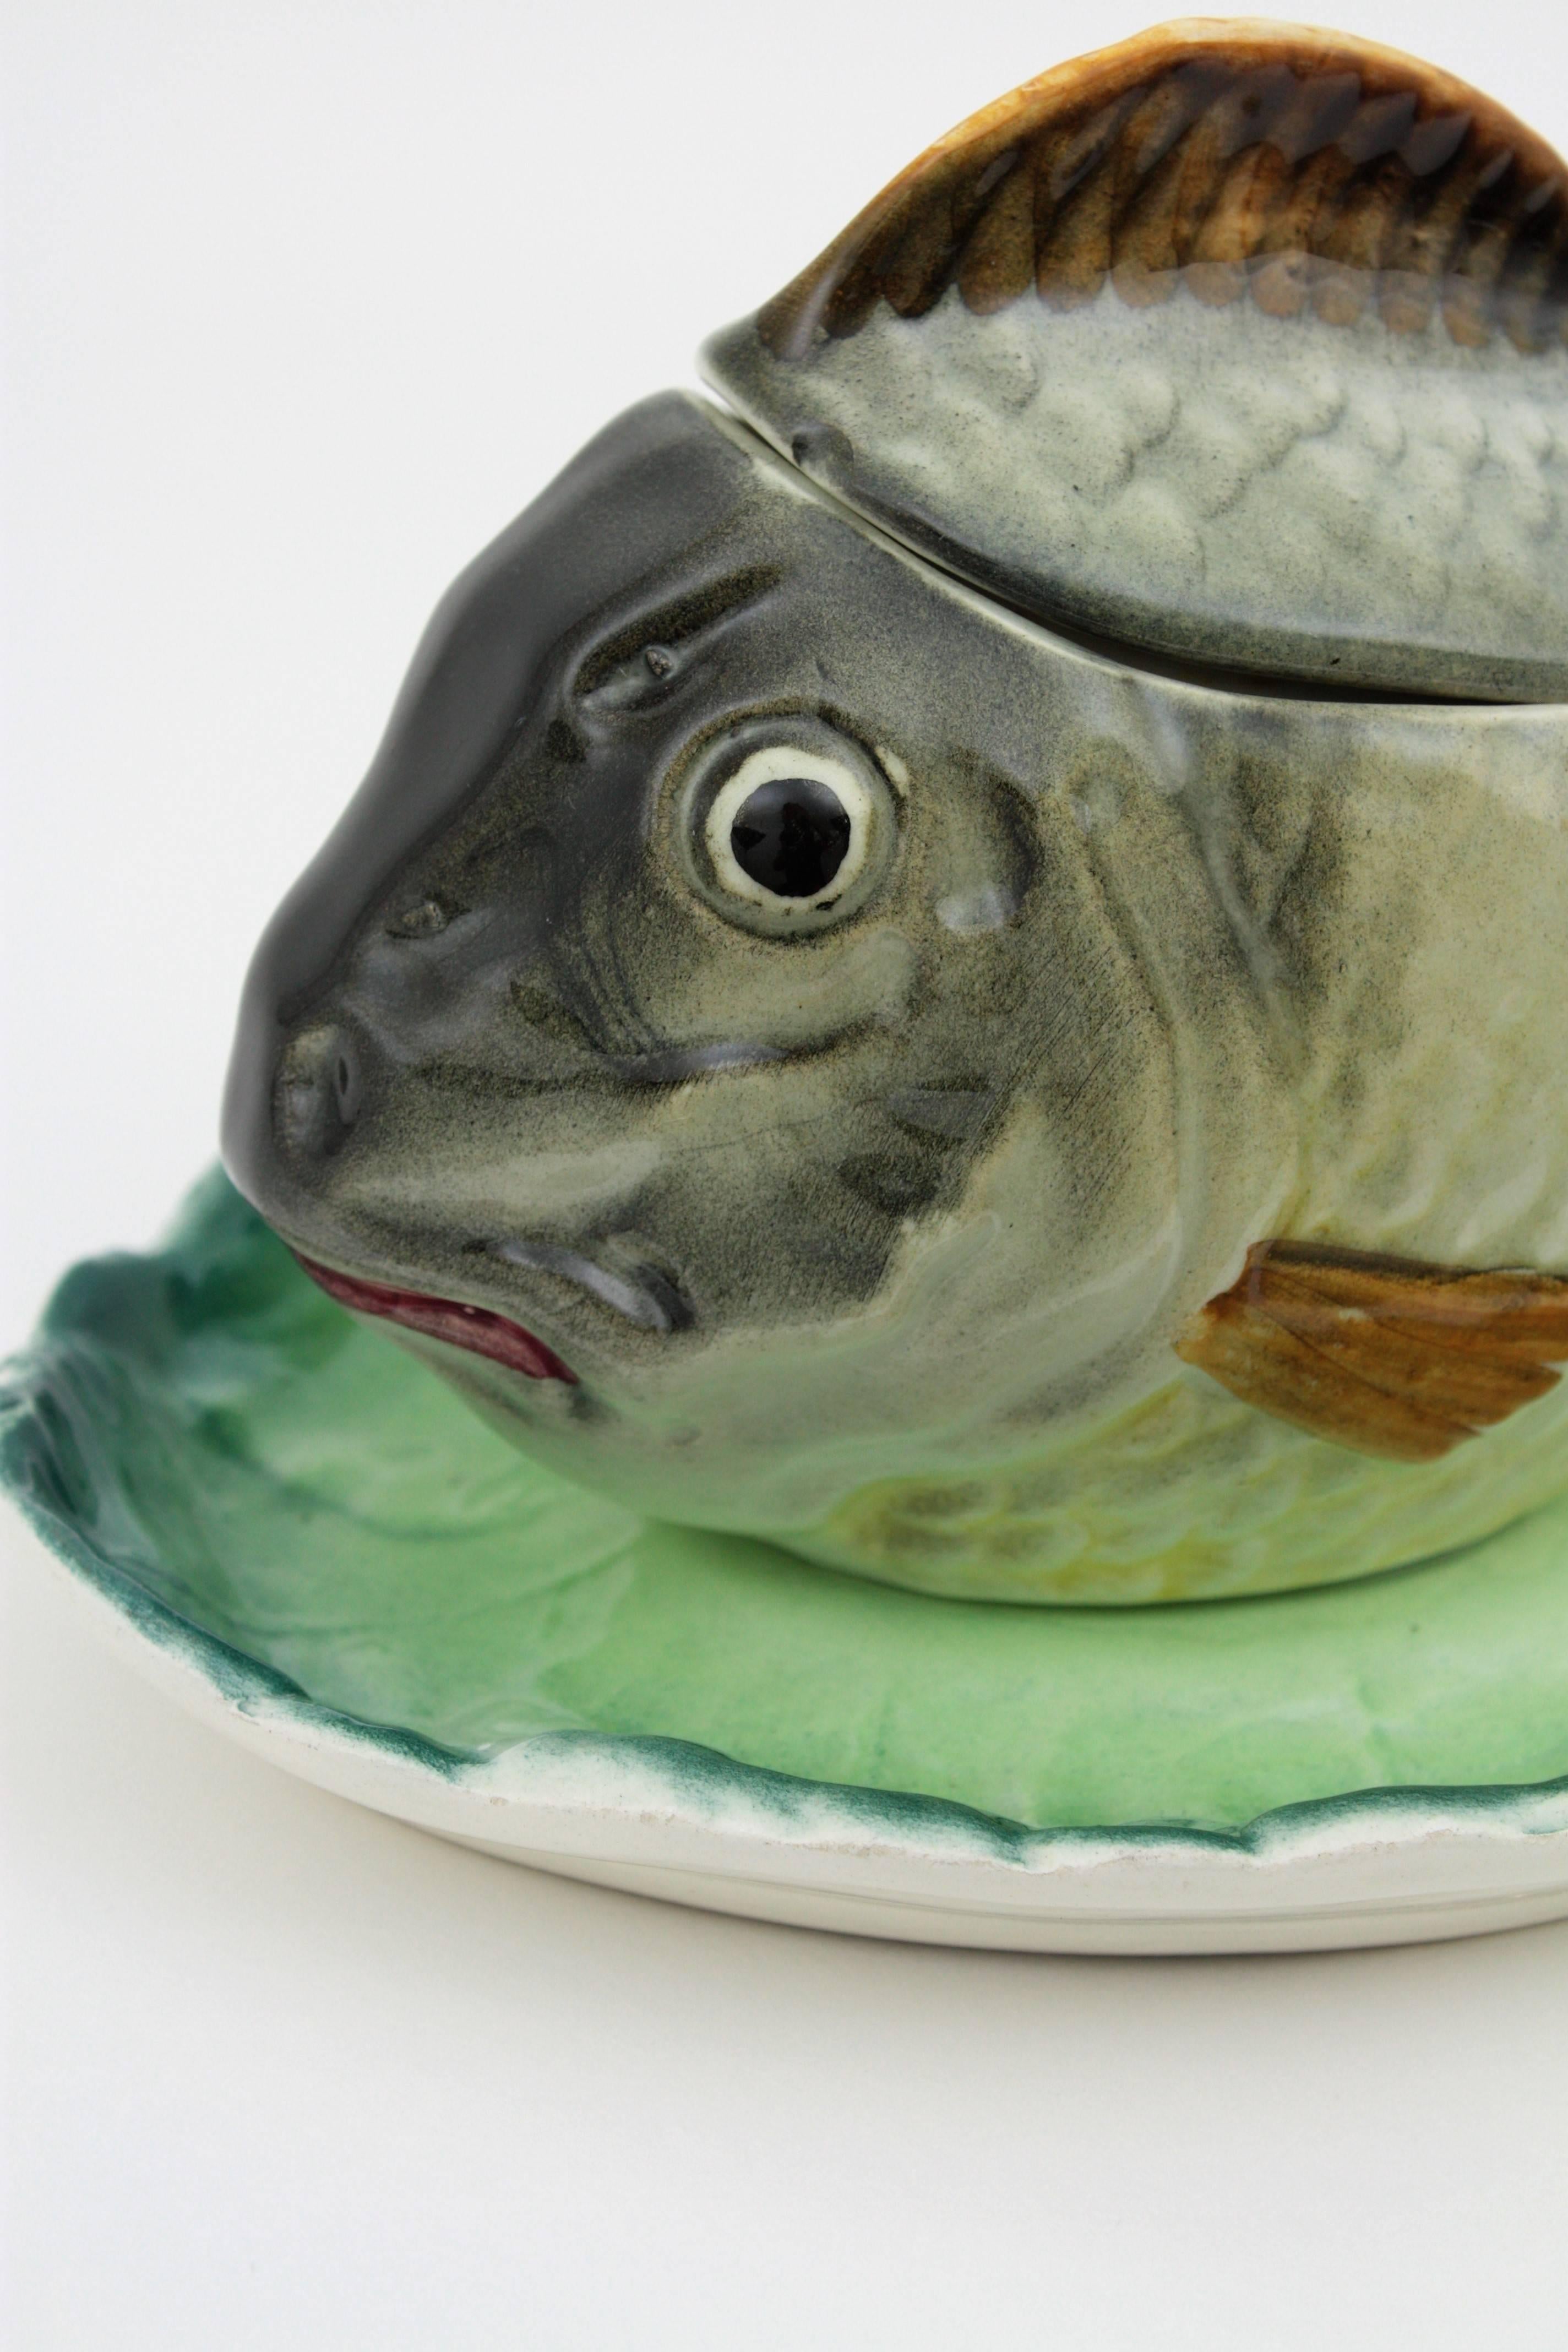 A lovely and colorful Manises ceramic sauce boat with a fish figure on a plant leaf manufactured by Hispania CH-Lladró.
This piece is in excellent condition and it is full of expressiveness and beautiful details. 
Spain, 1960s-1970s.